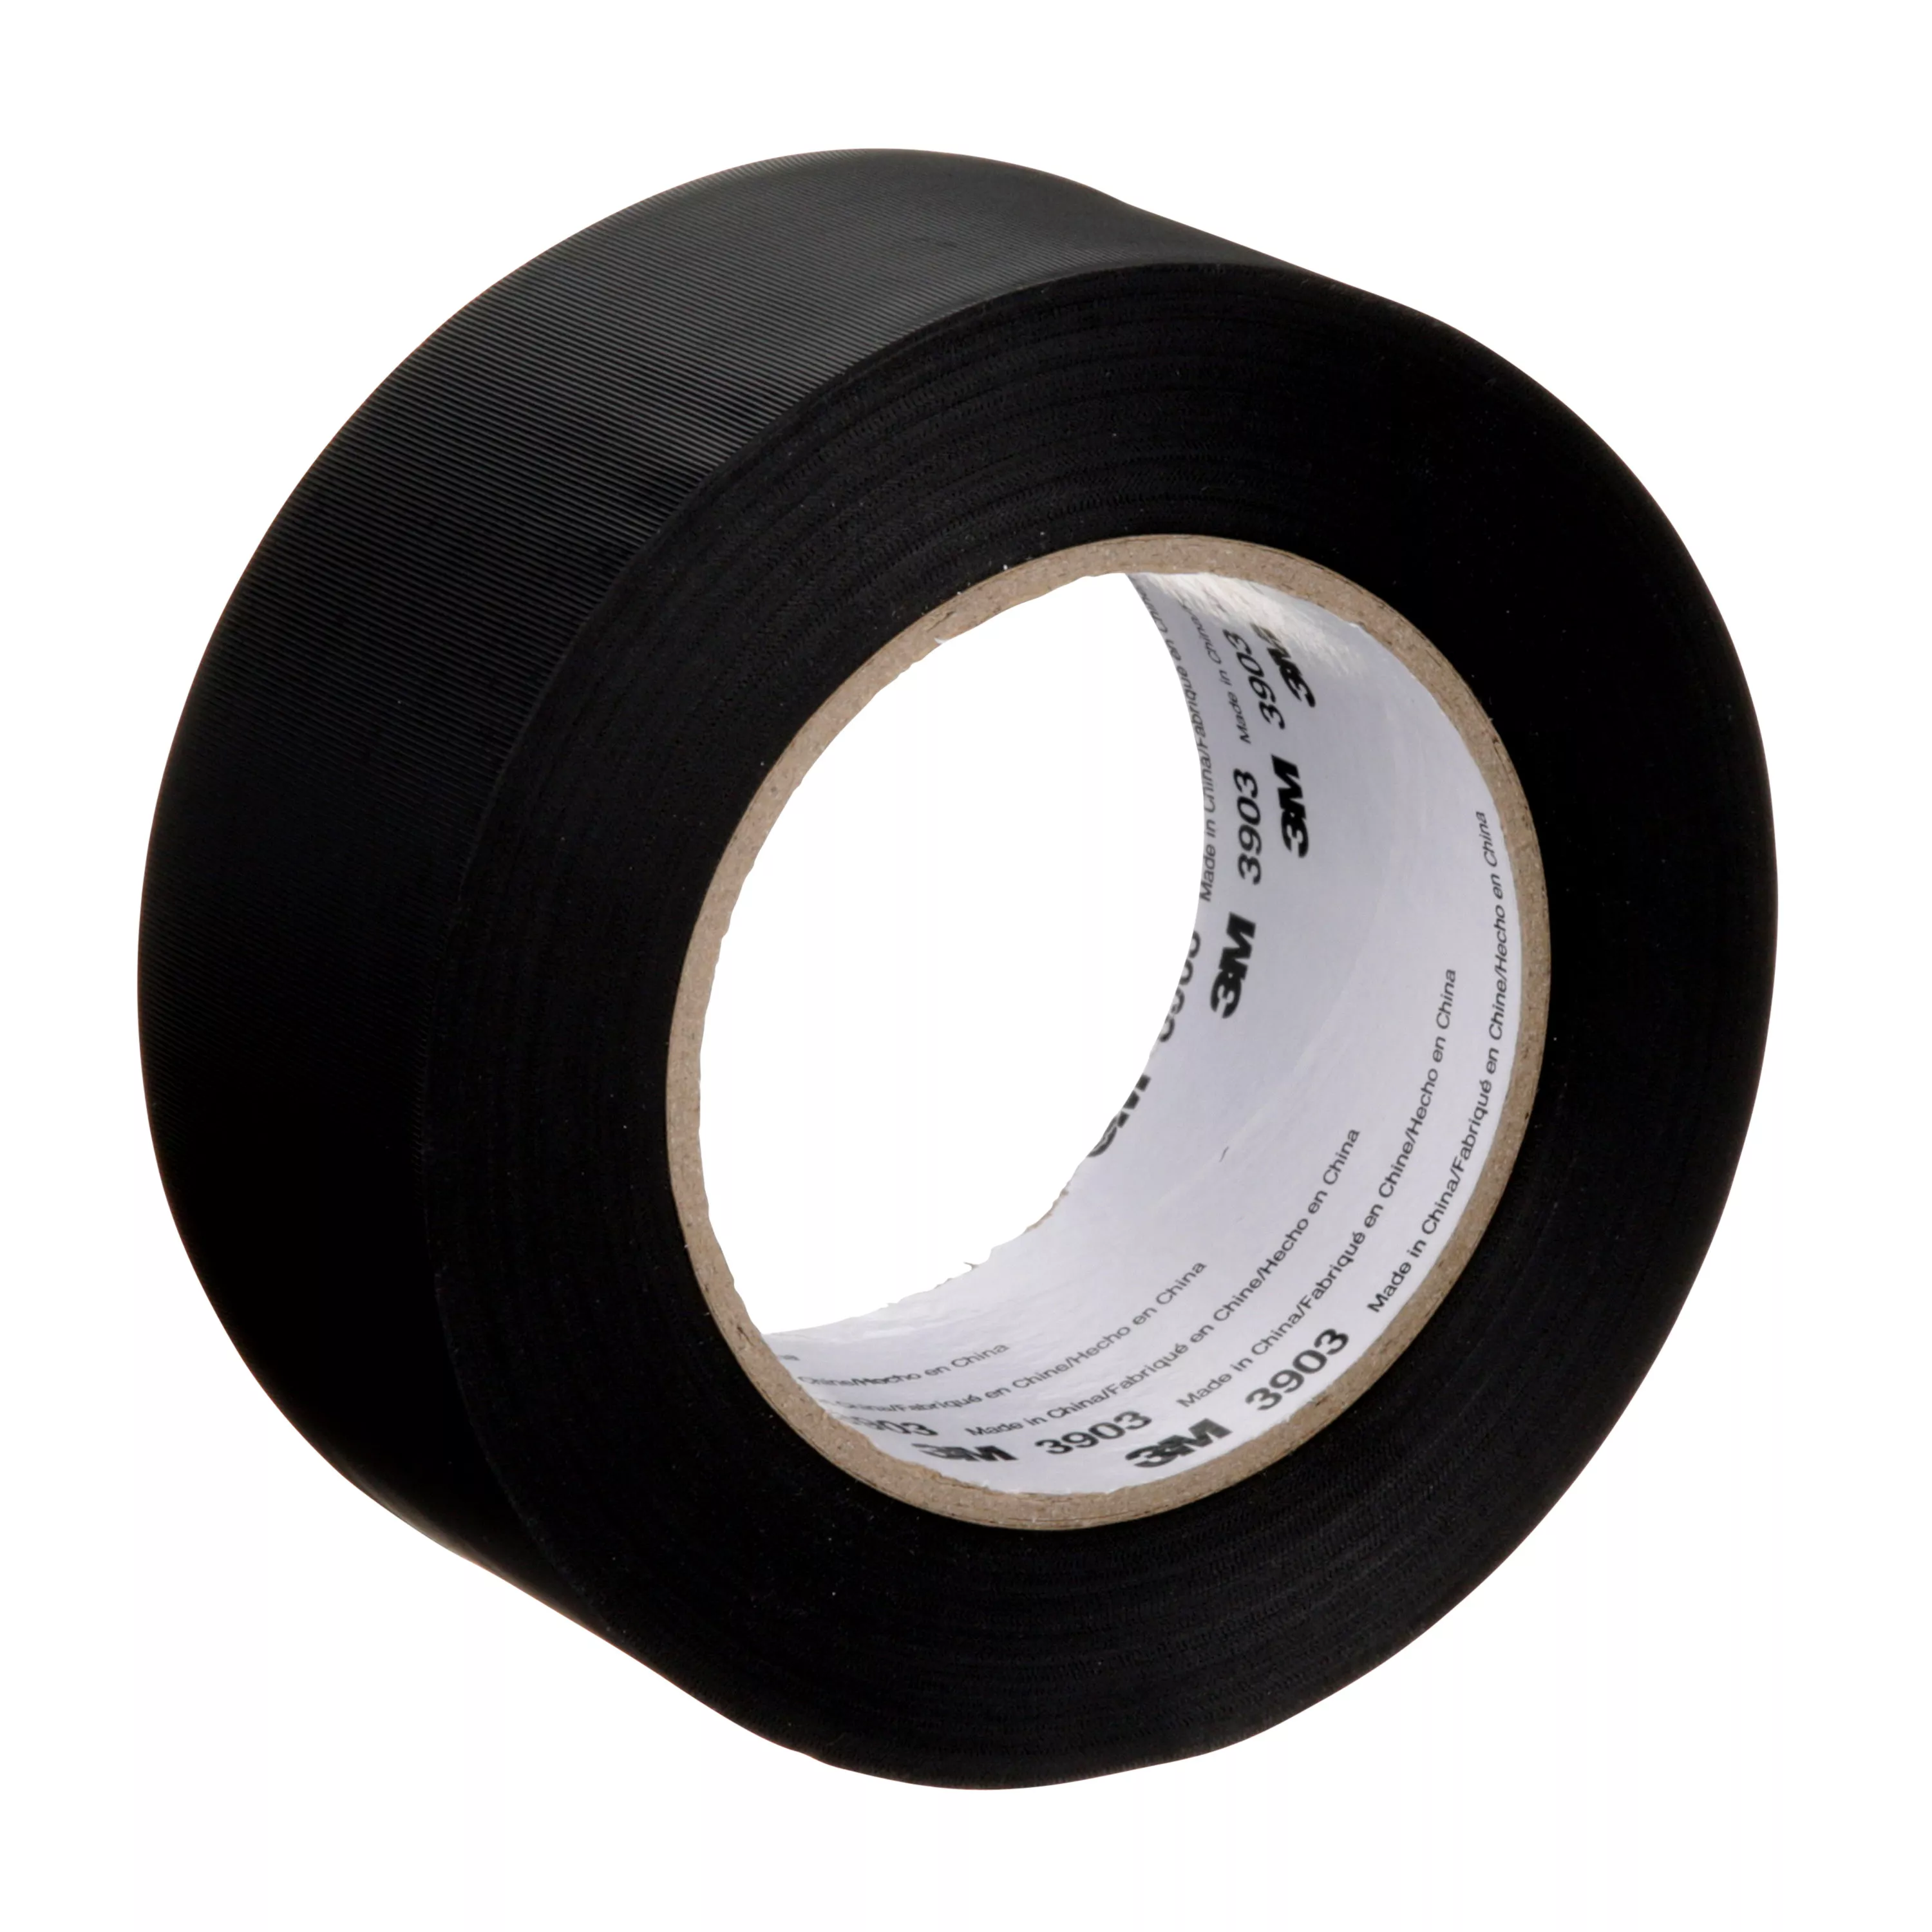 3M™ Vinyl Duct Tape 3903, Black, 2 in x 50 yd, 6.5 mil, 24/Case,
Individually Wrapped Conveniently Packaged